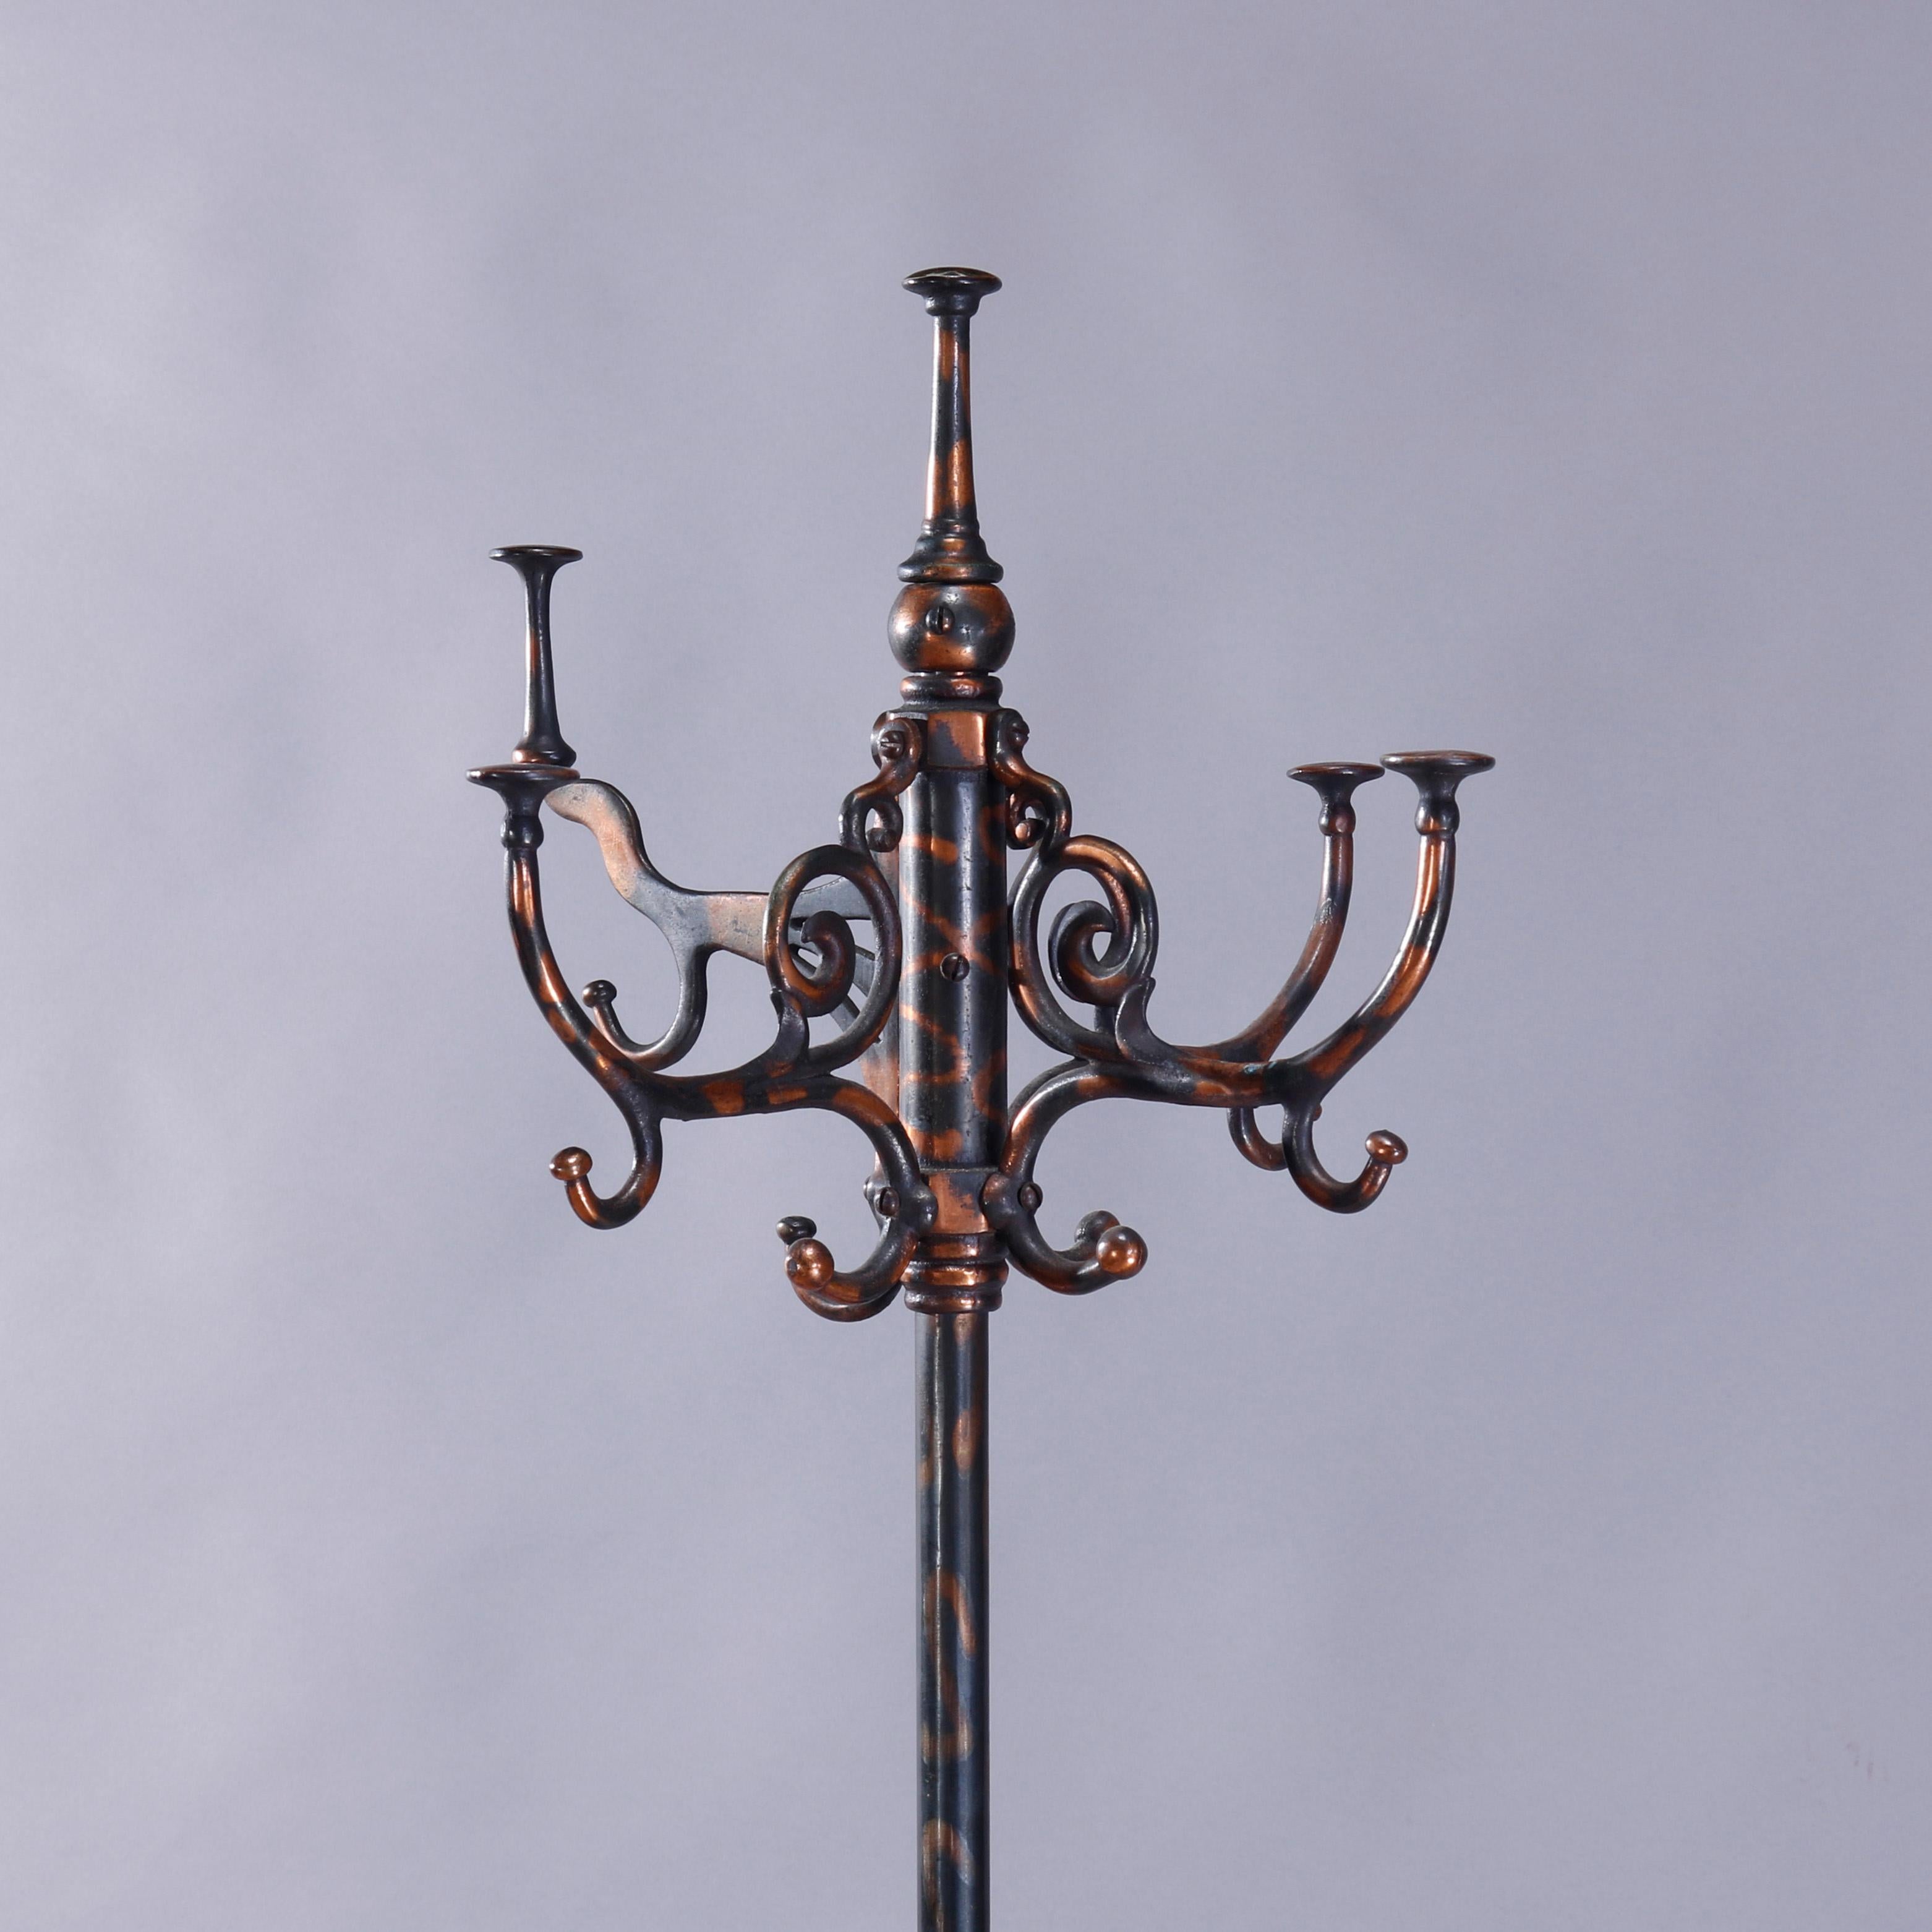 An antique Victorian coat tree offers flashed Copper and wrought iron construction with upper coat hooks having scrolled corbels raised on central column with umbrella receivers over drip tray and terminating in cabriole legs, c1900

Measures: 70